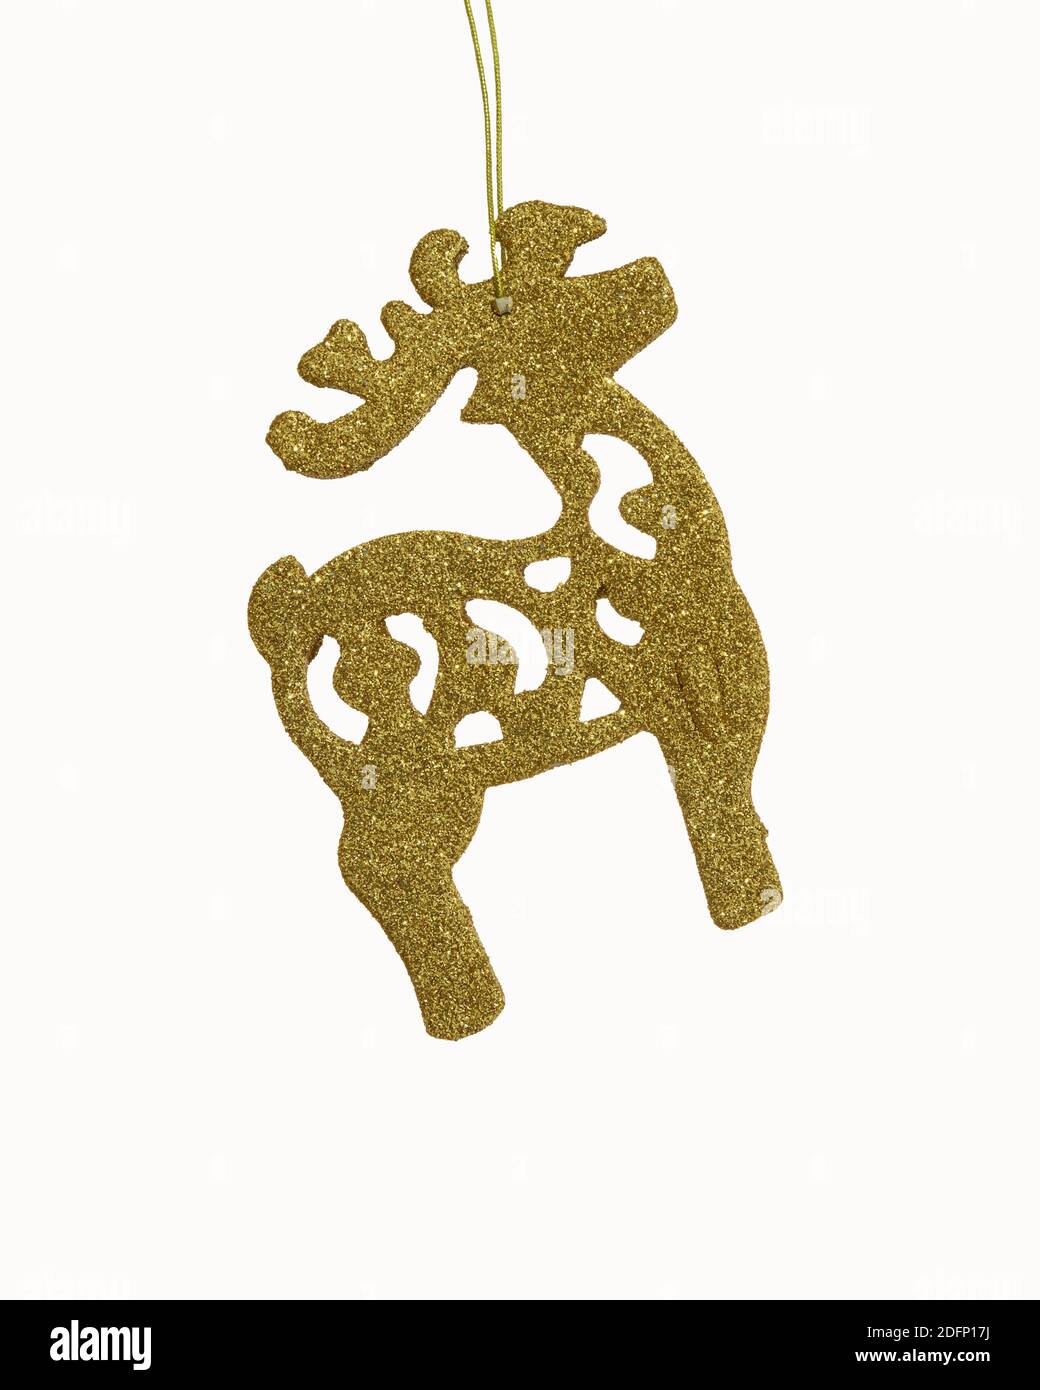 A golden colored Reindeer shaped artwork used for decorating a Christmas tree or within the house. Stock Photo